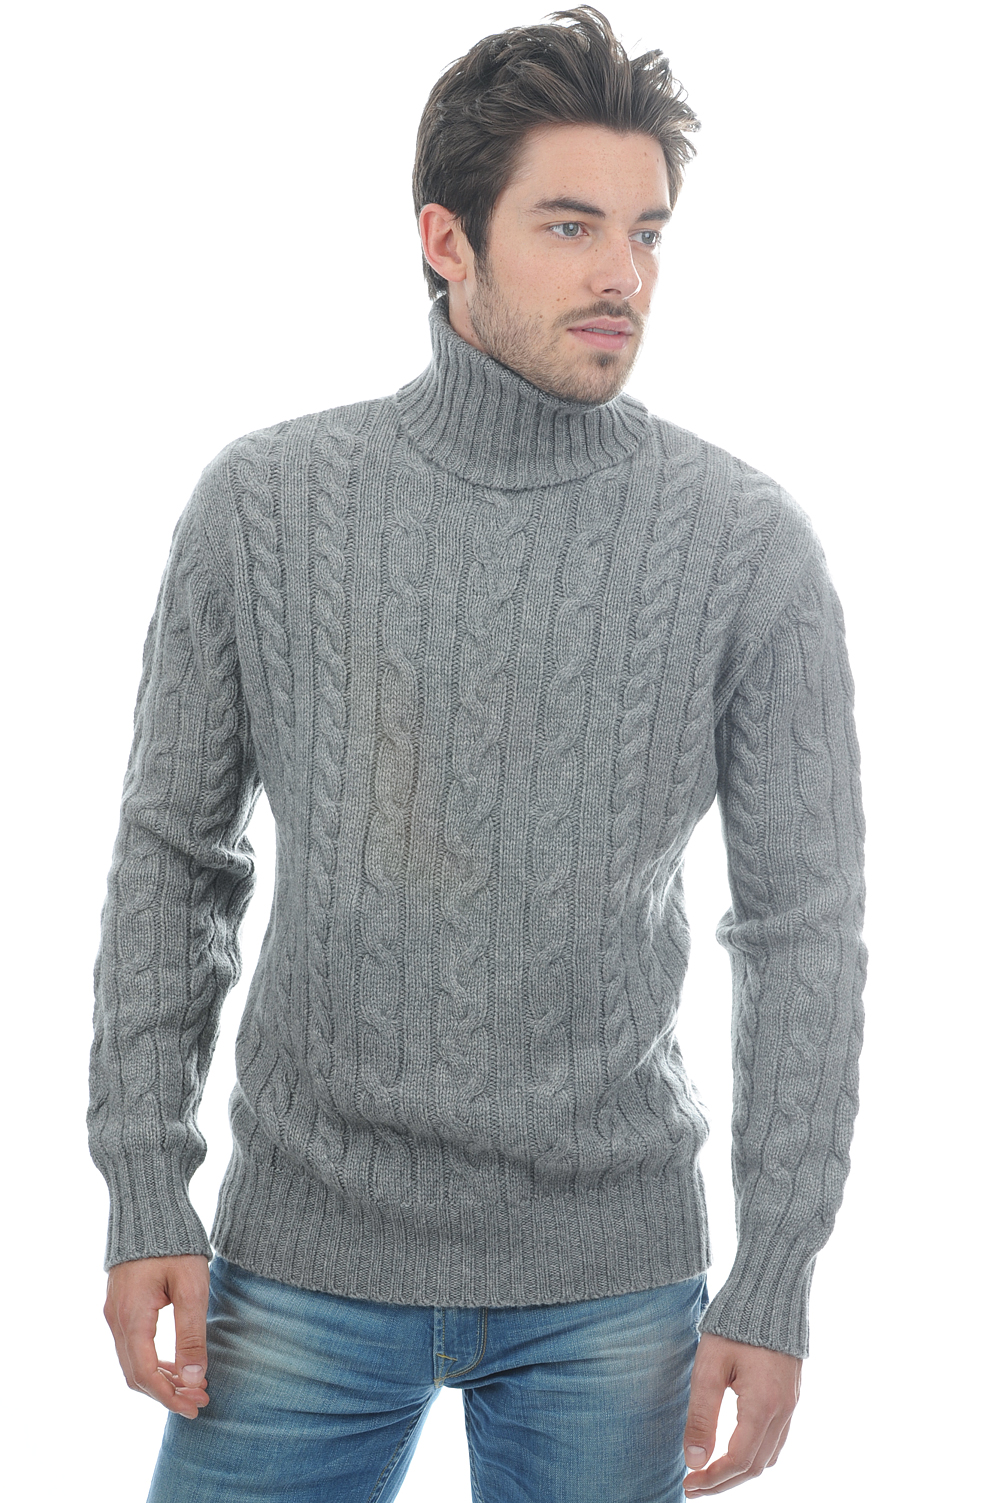 Cashmere men chunky sweater lucas grey marl s